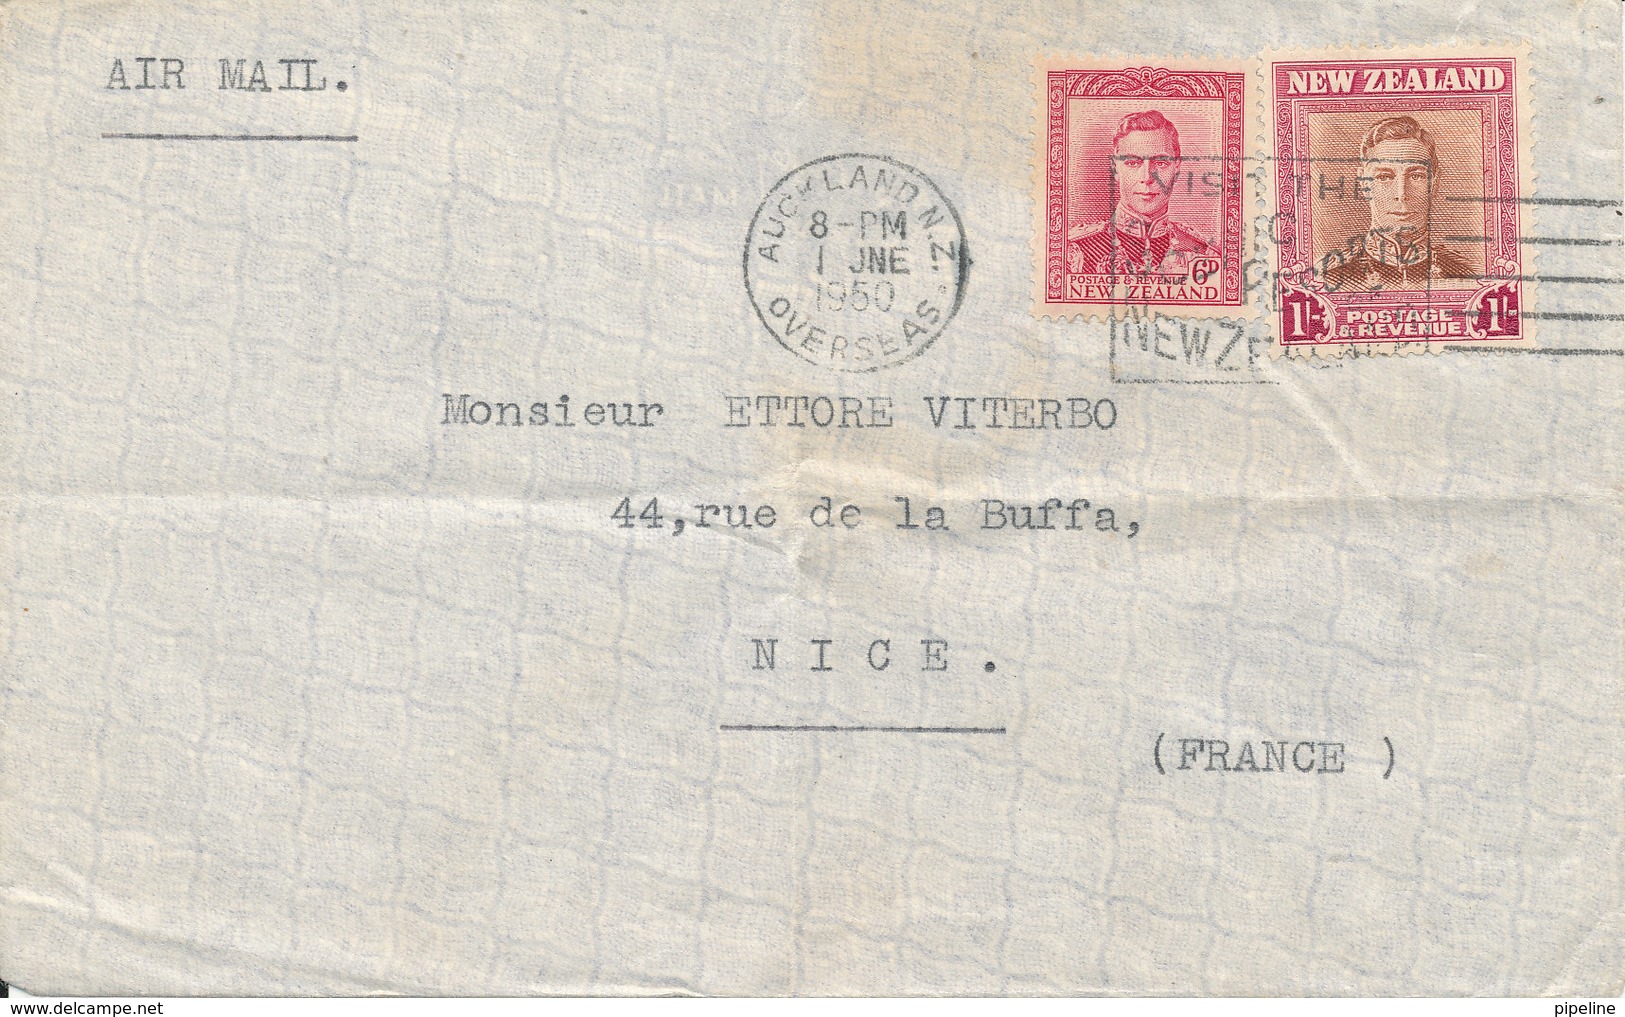 New Zealand Air Mail Cover Sent To France Auckland 1-6-1950 (the Cover Is Bended) - Luftpost